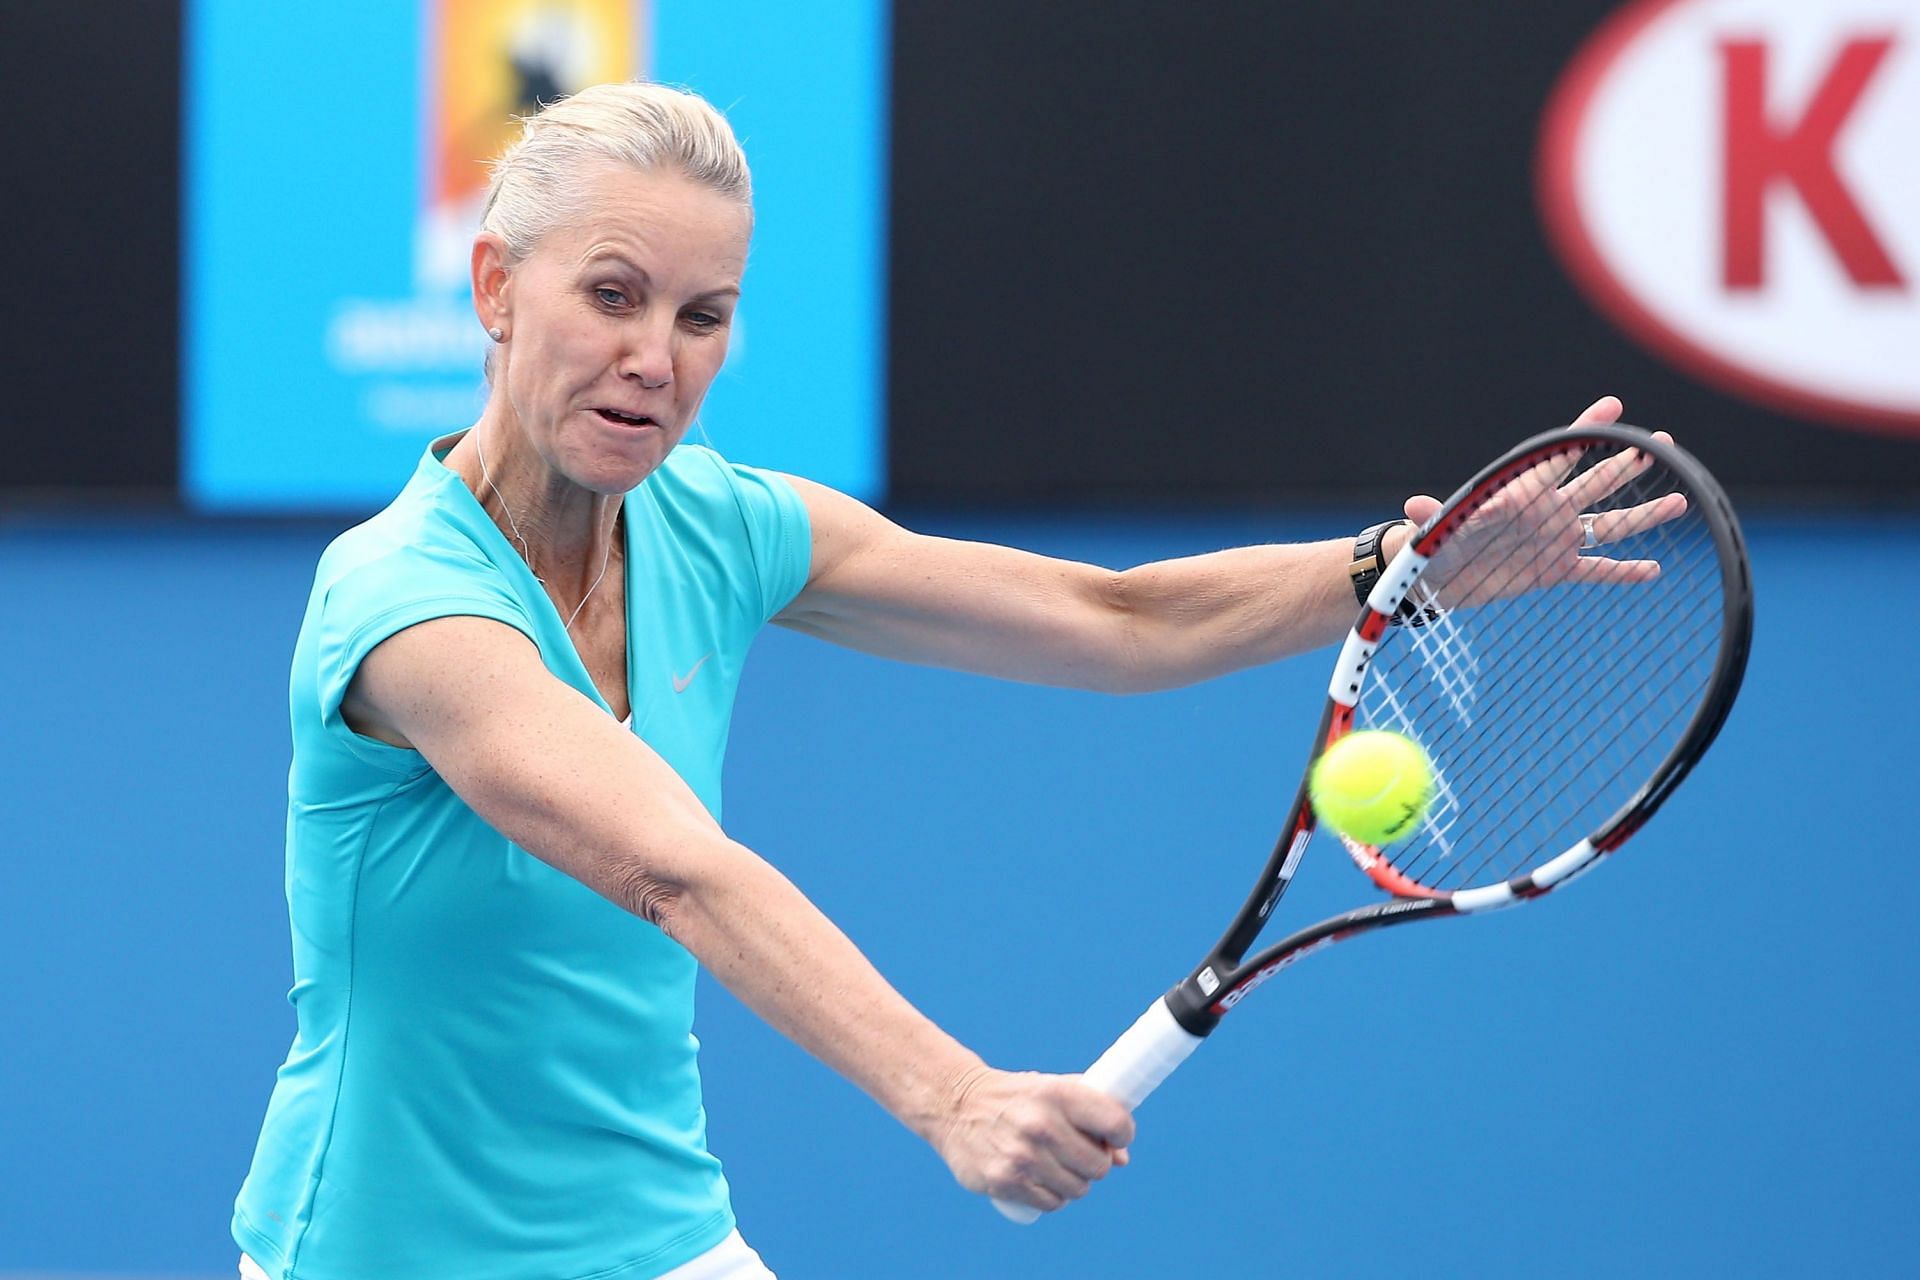 Rennae Stubbs plays a backhand during the legends doubles match in the 2015 Australian Open.